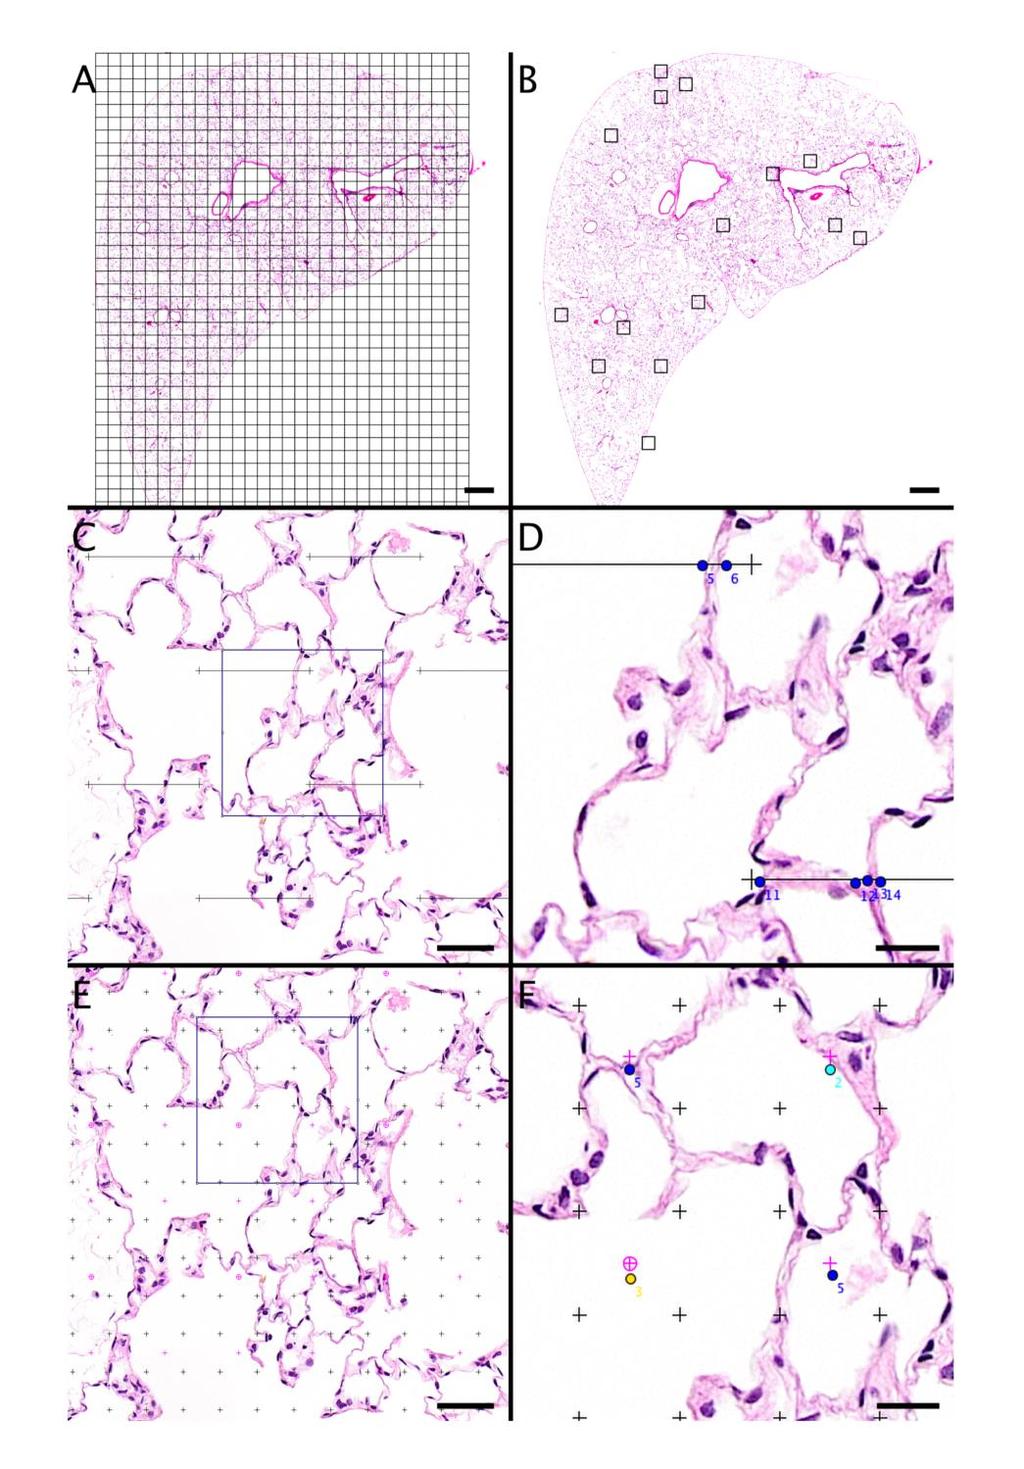 fig. S9. Outline of stereologic analysis. (A) Lung section divided into grid of square fields. (B) Random fields selected for analysis. (C) Random field with line grid for surface measurements.